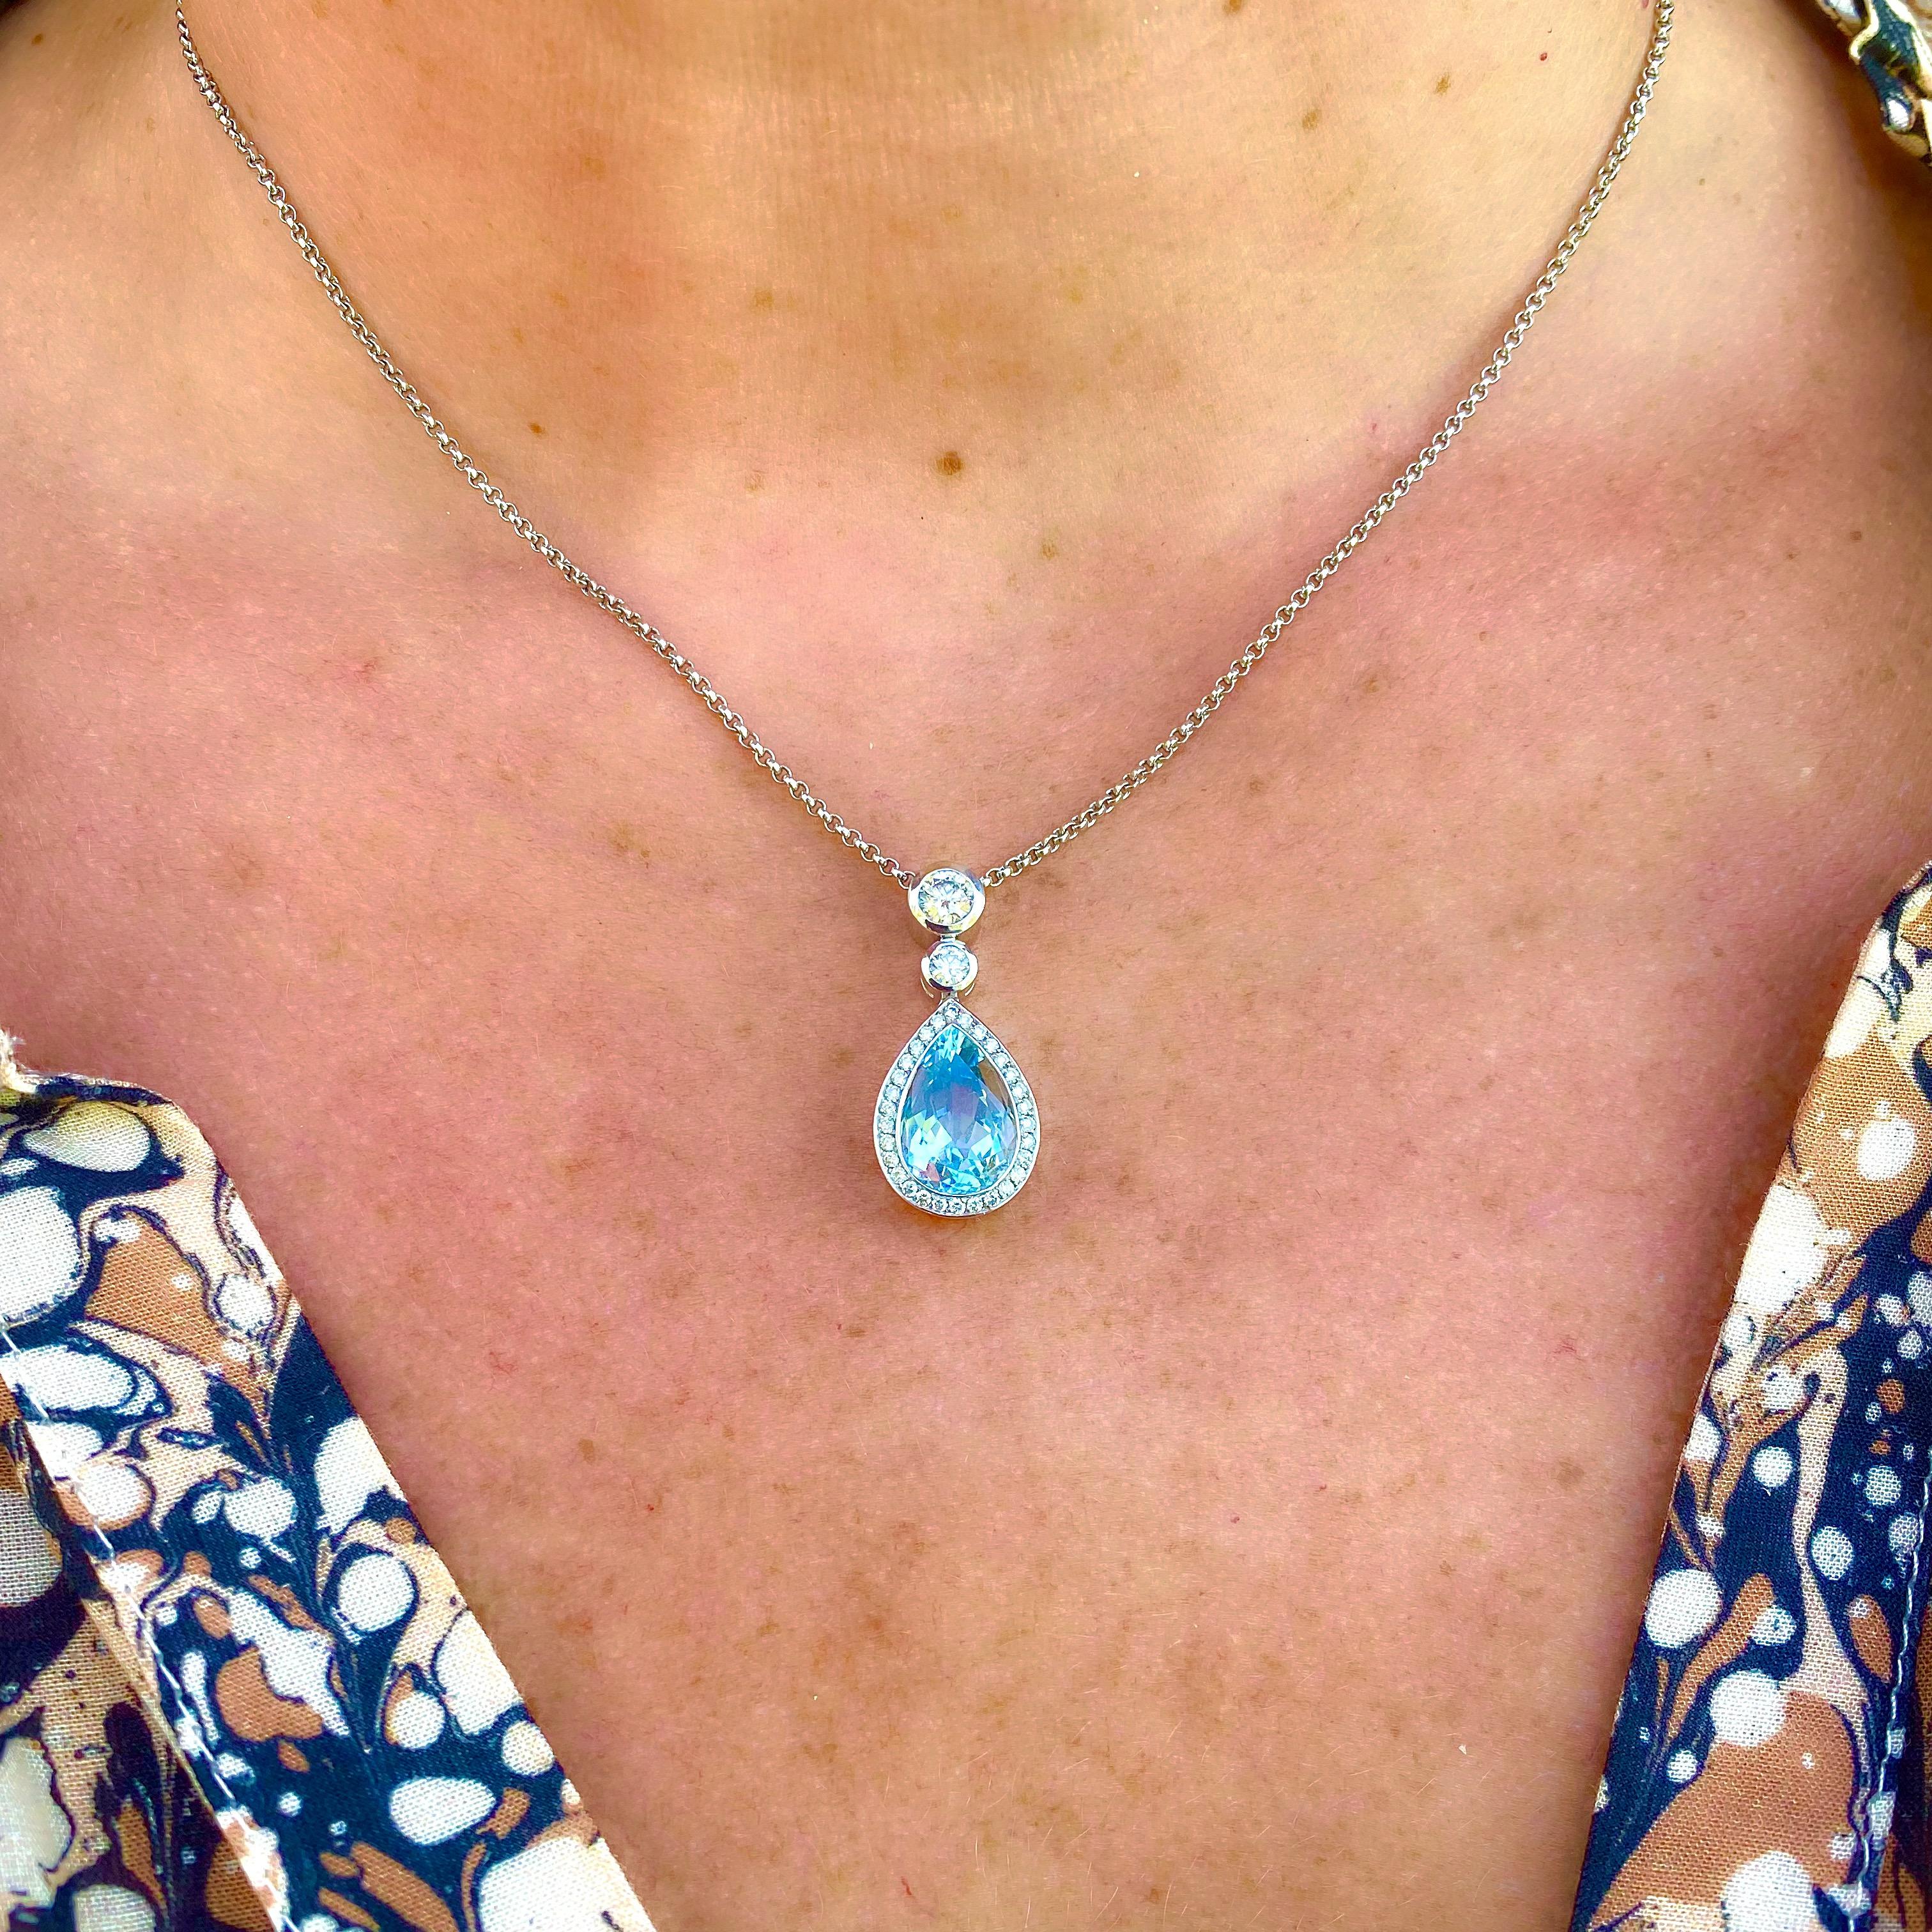 Elegant and classic, this 18k white gold necklace is a great addition to one's collection! The pendant features a pear-shaped aquamarine weighing 3.62 carats, framed and surmounted with round brilliant-cut diamonds, weighing in total 0.64-ct., and